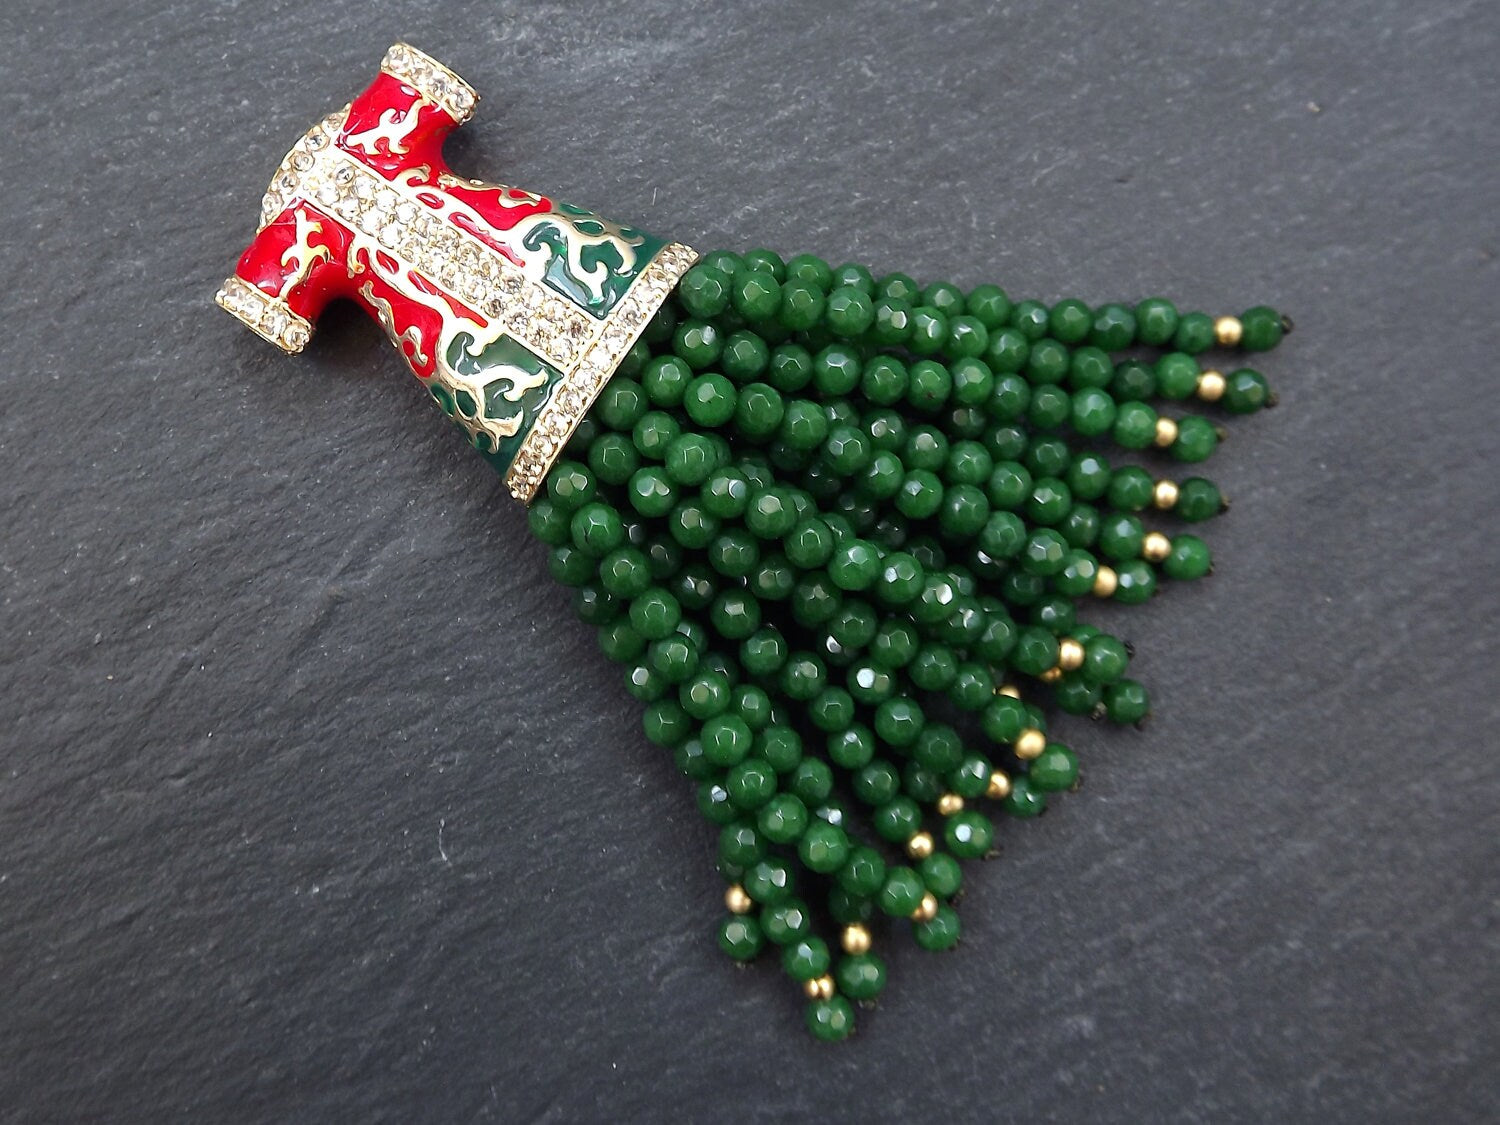 Large Turkish Caftan Facet Cut Green Jade Stone Beaded Tassel Pendant with Crystal Accents Antique Bronze - 1pc - Limited Stock